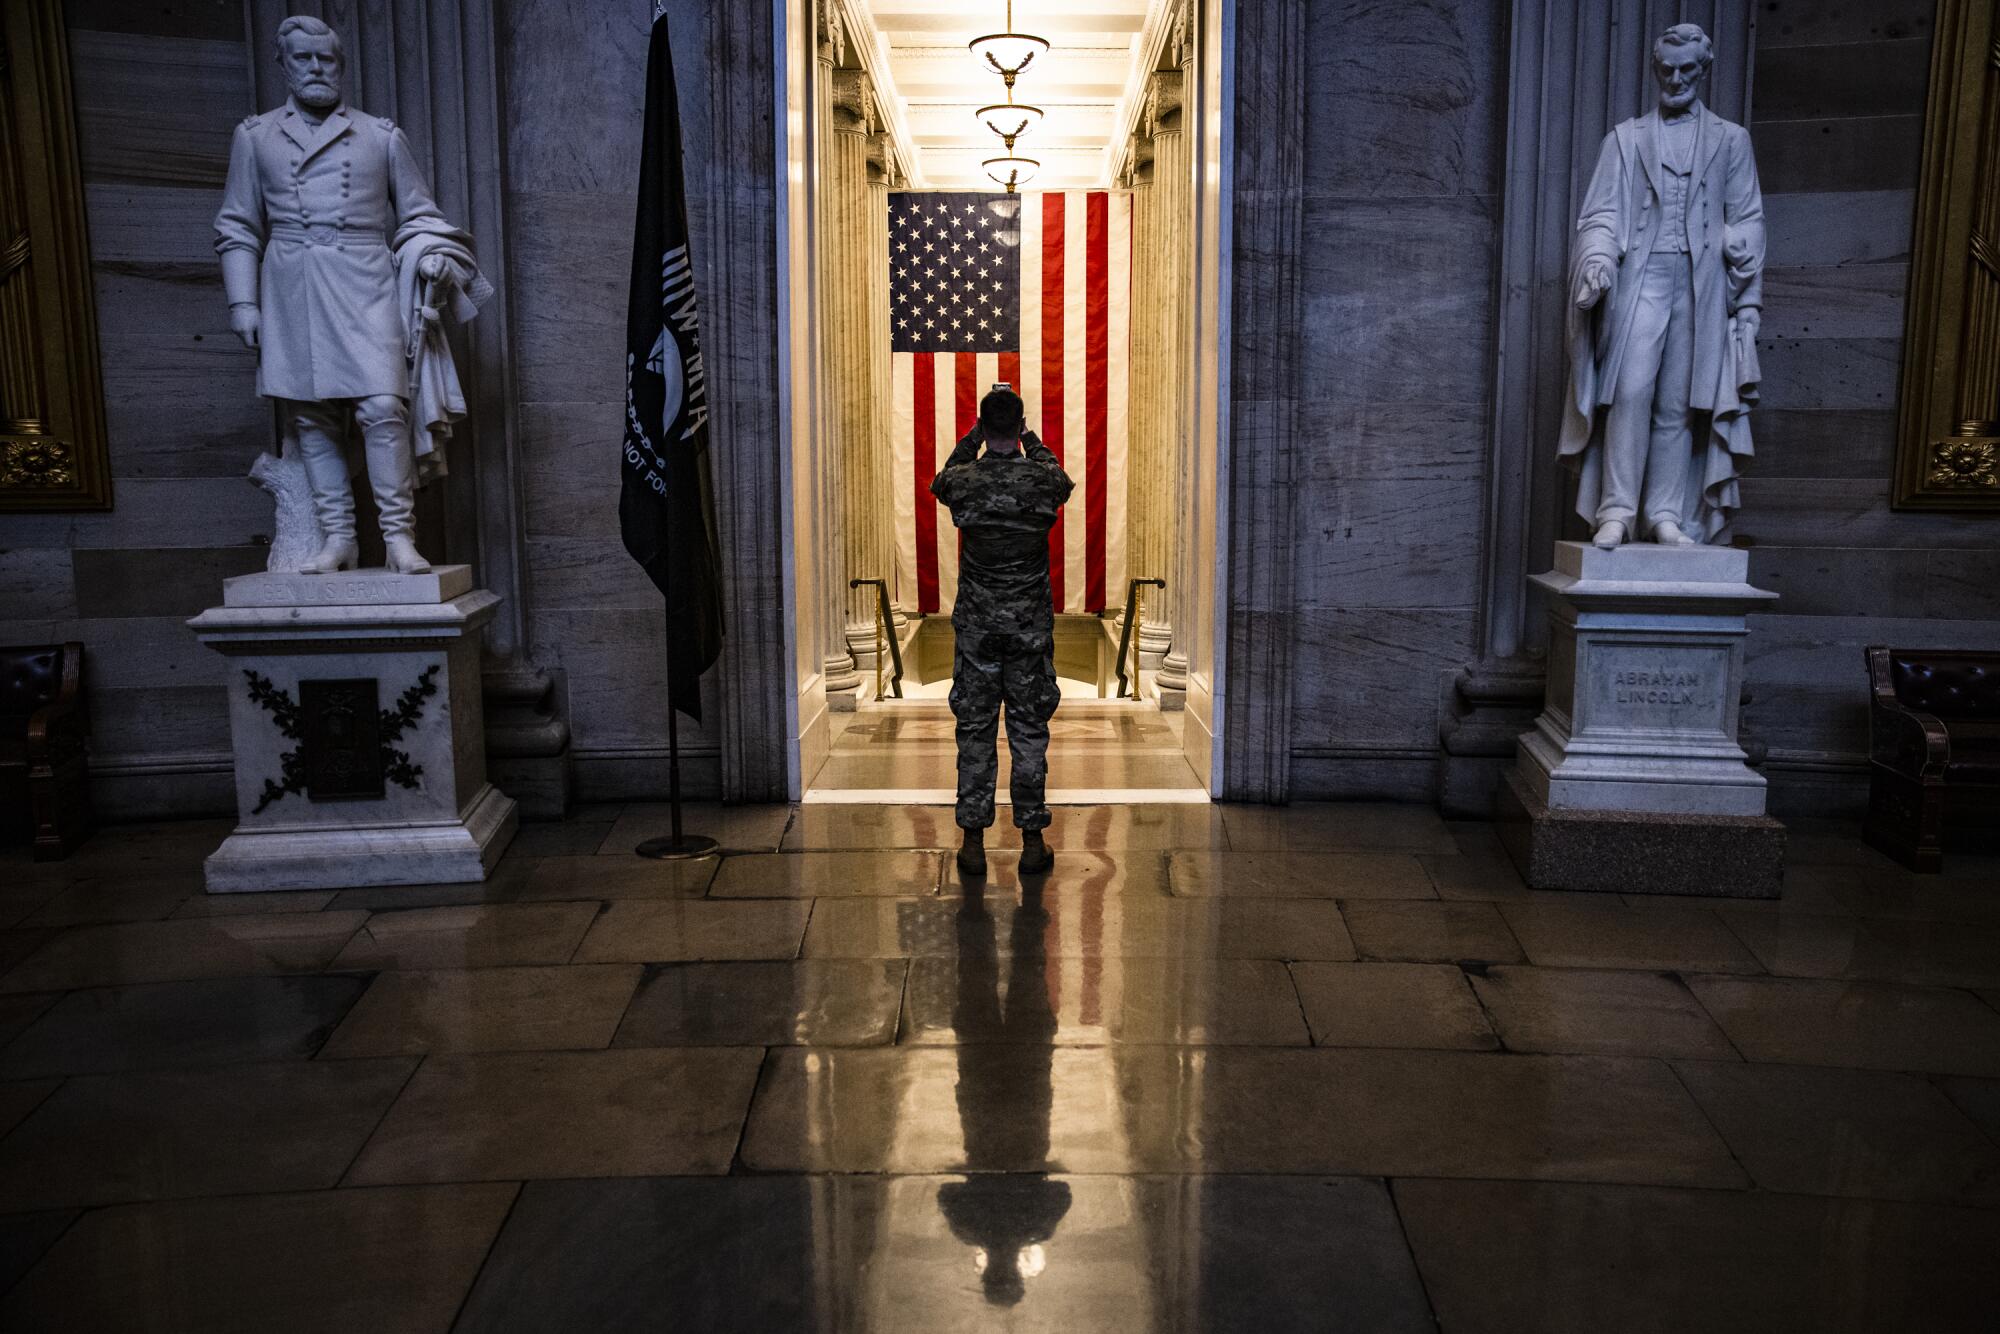 A troop in camo fatigues stands in front of a large flag in the Capitol 